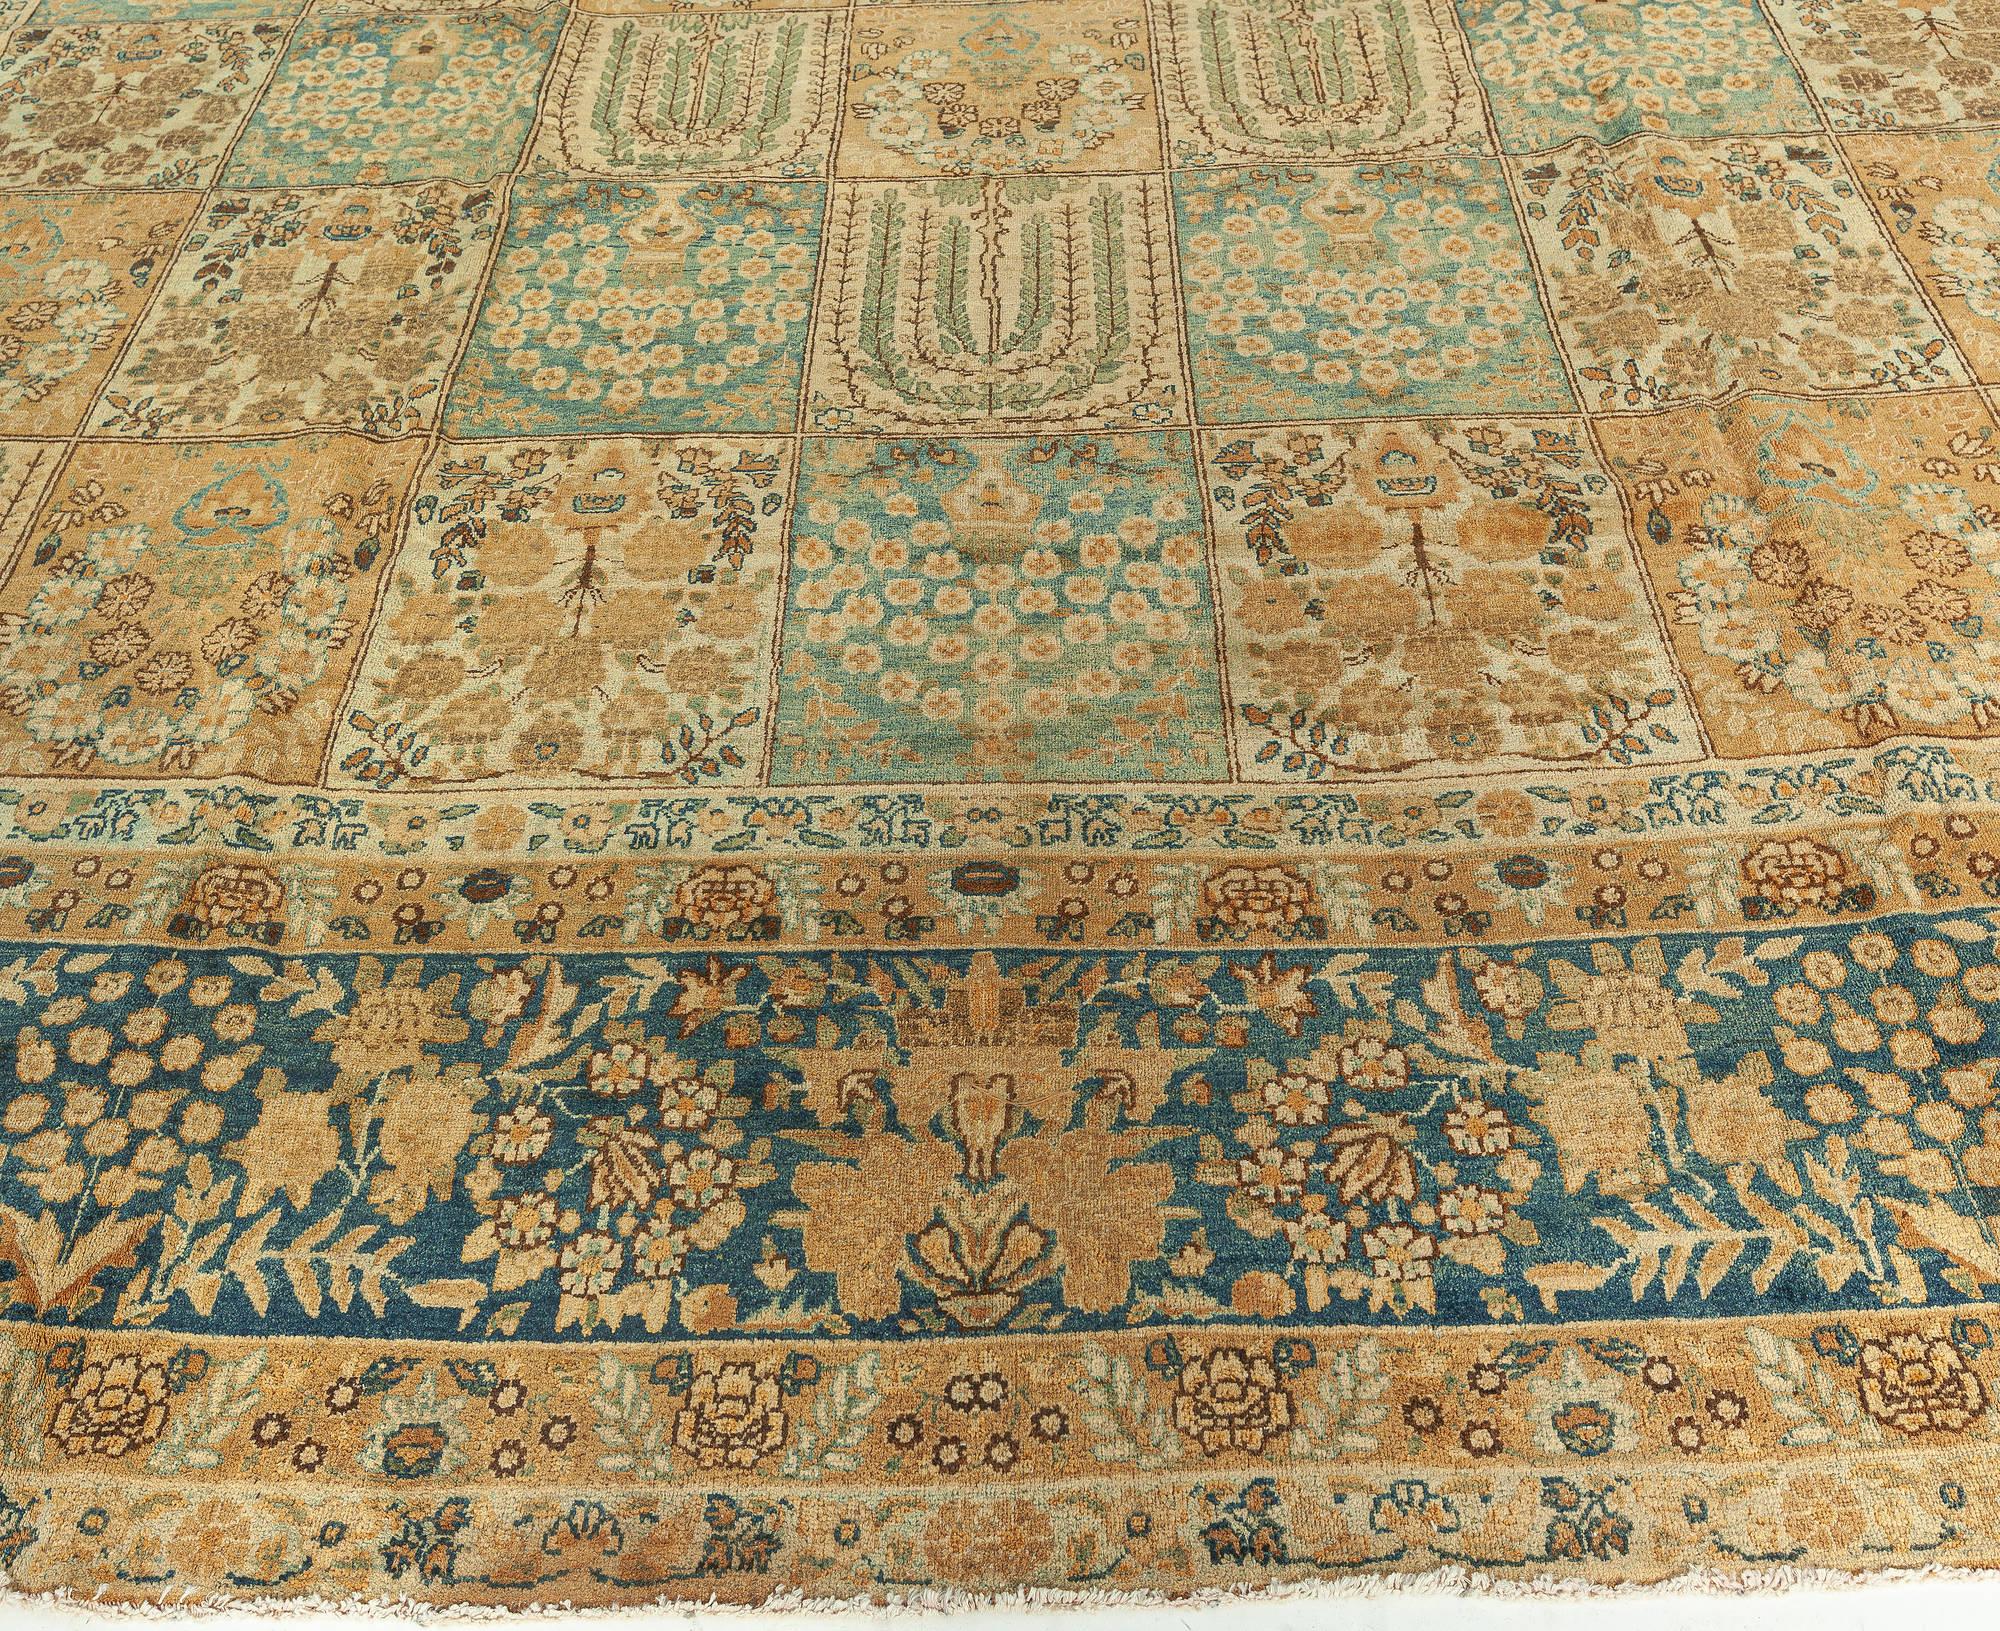 19th Century Persian Tabriz Botanic Handmade Rug In Good Condition For Sale In New York, NY